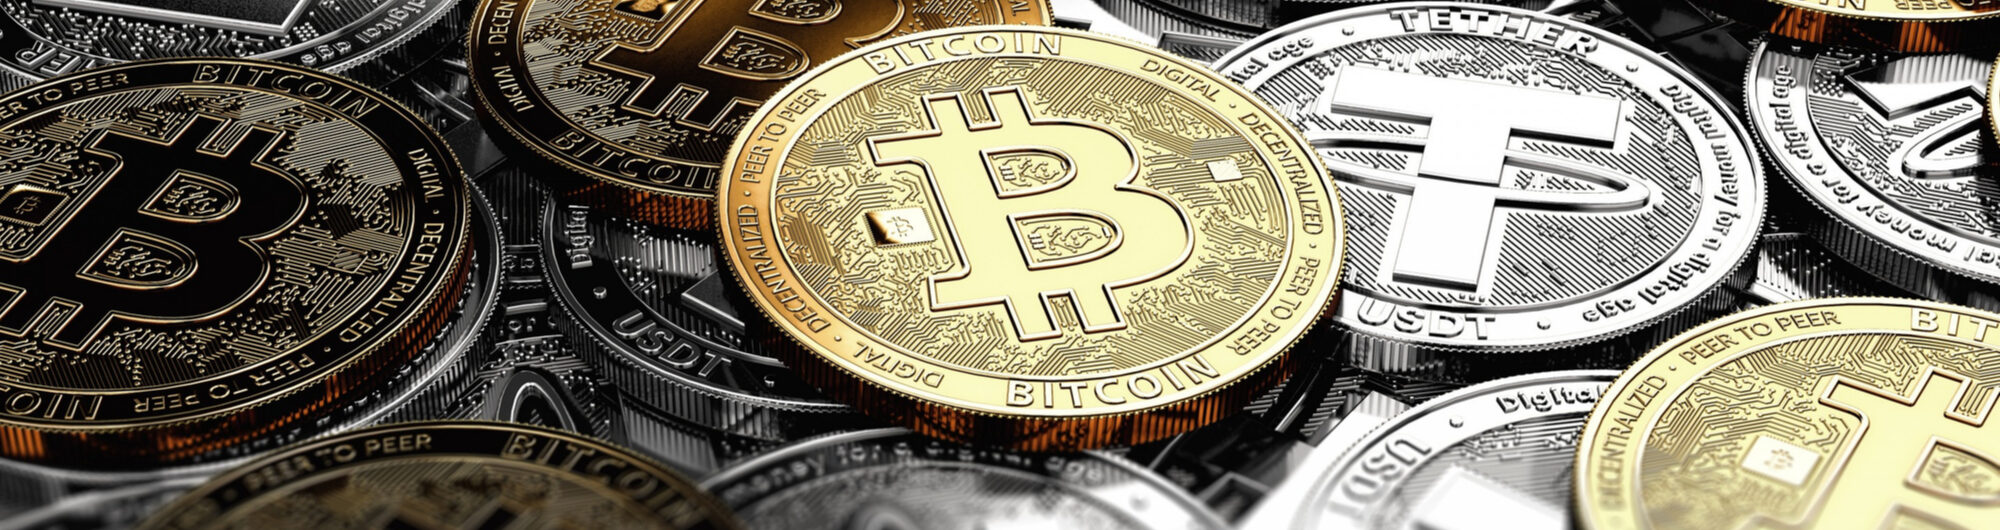 Cryptocurrency - Bitcoin